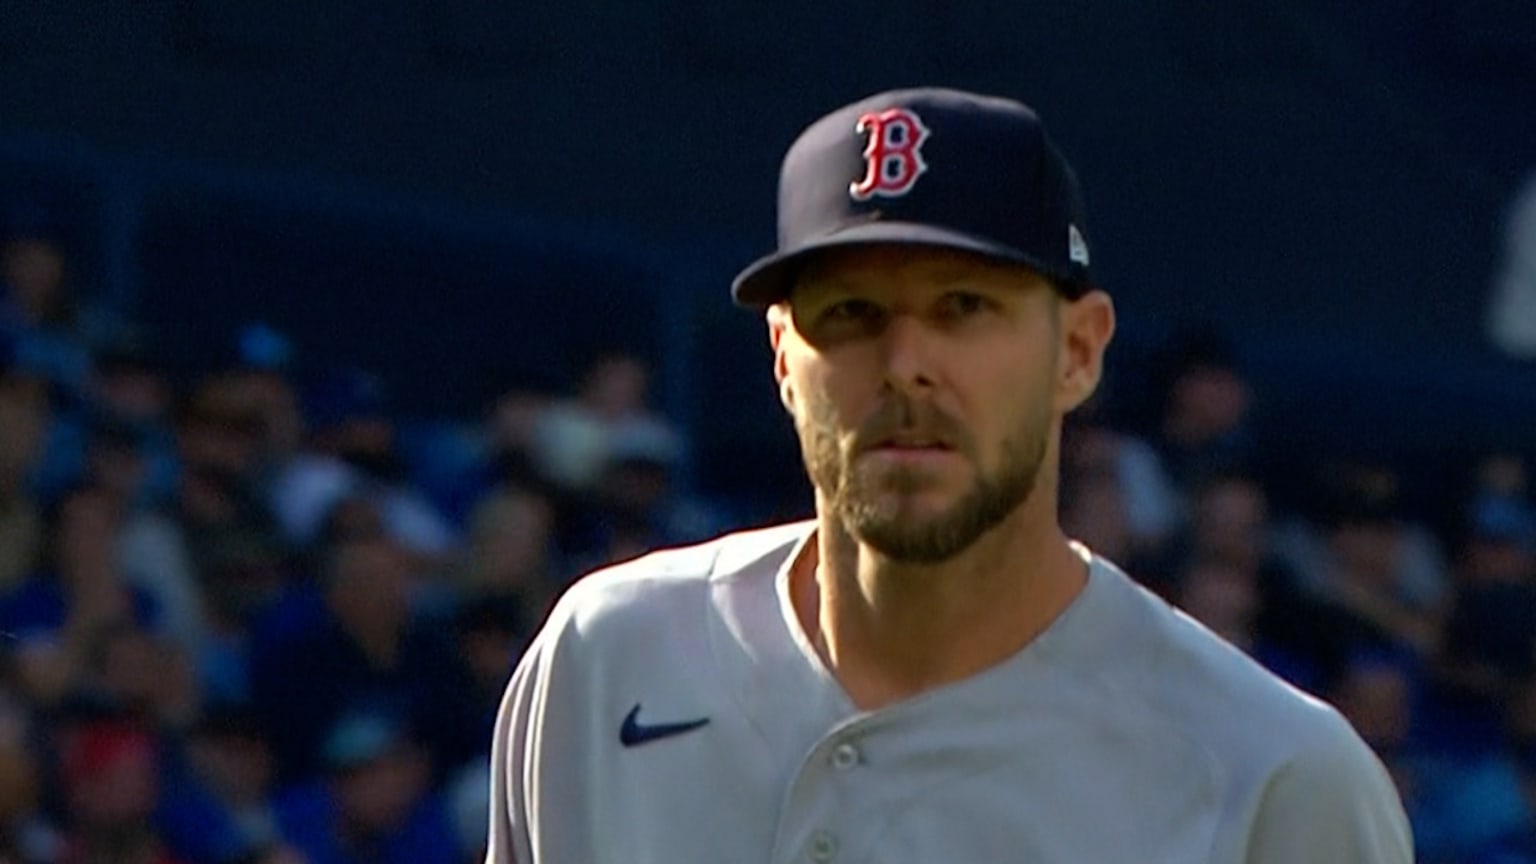 Chris Sale wasn't happy with short outing in his long-awaited